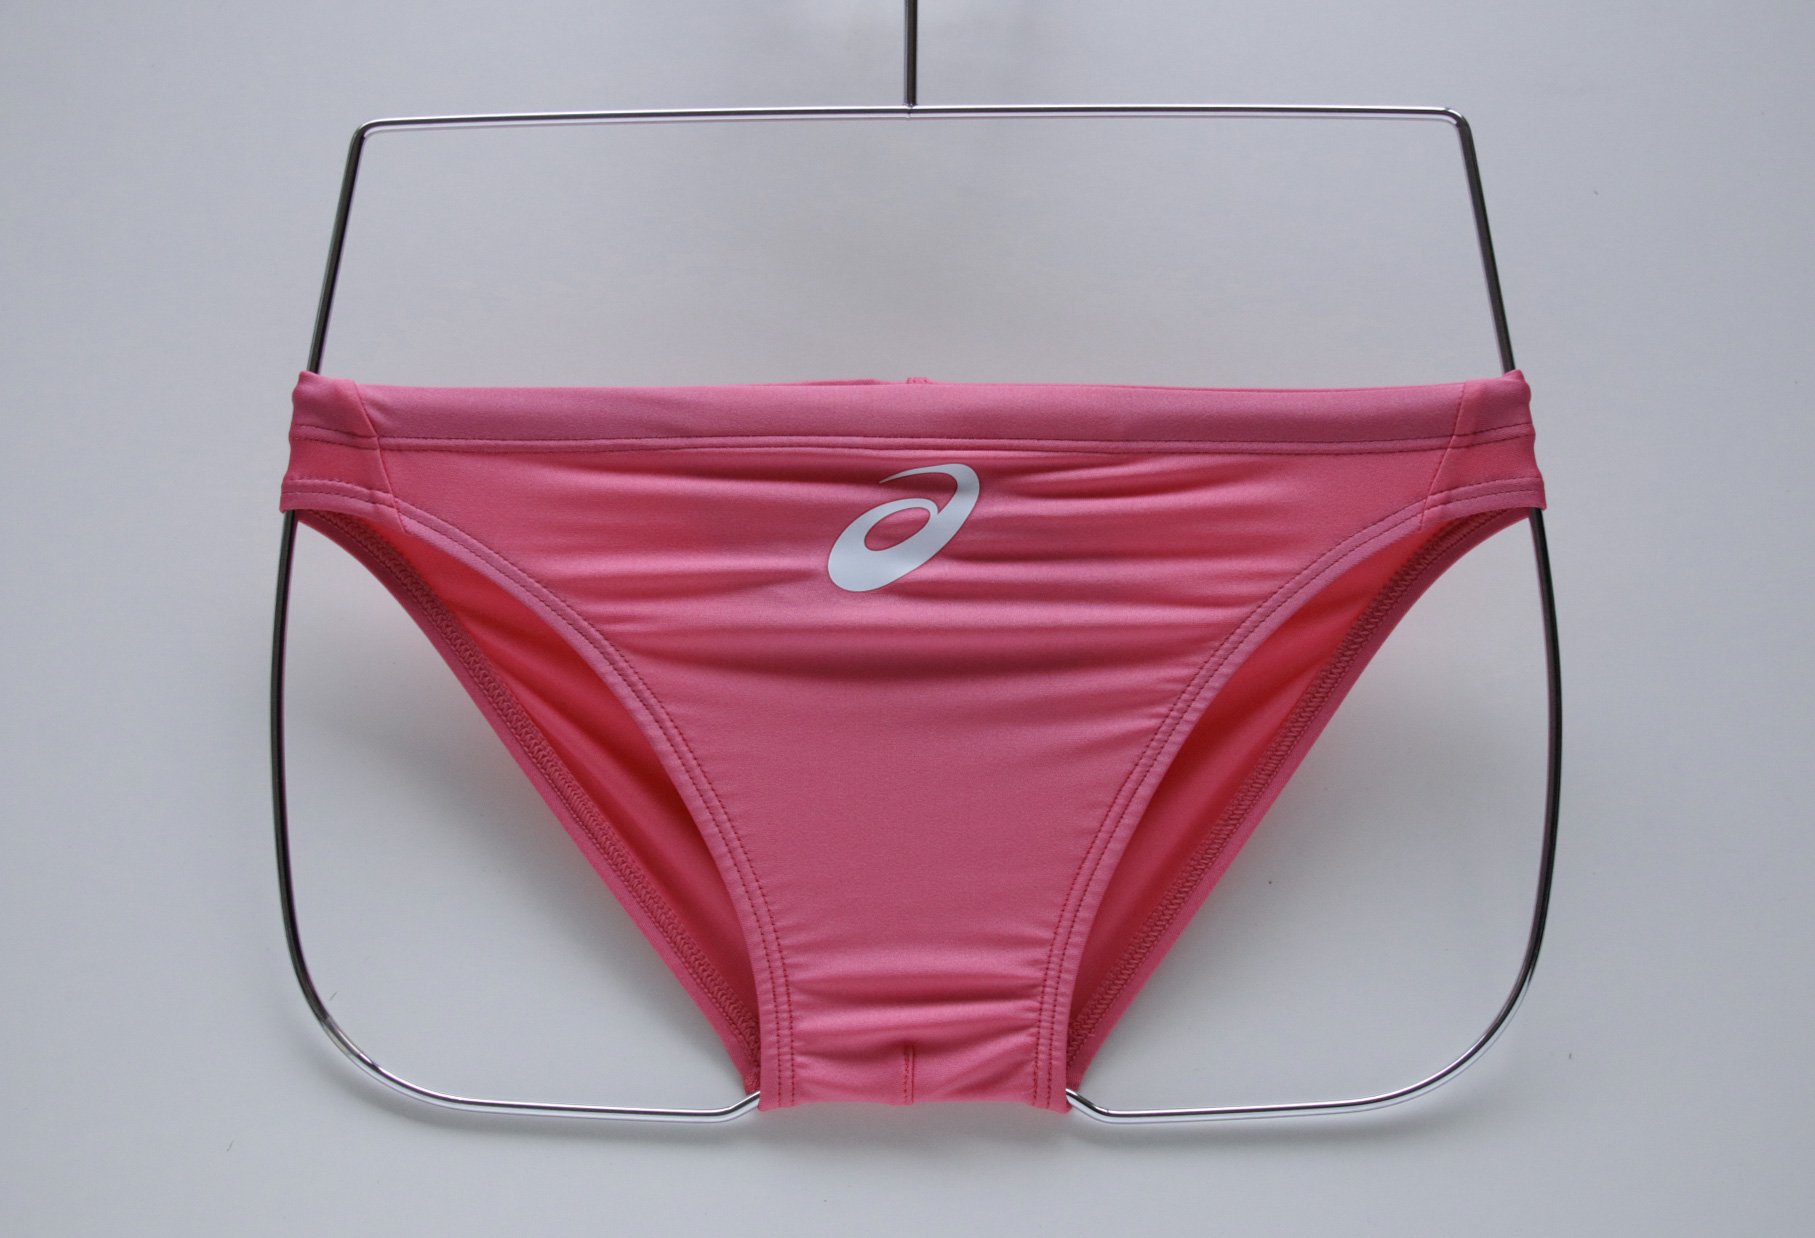 cigarrillo extremidades más asics Men's Competition Swimwear Successor to HYDRO-CD Brief Pink 700